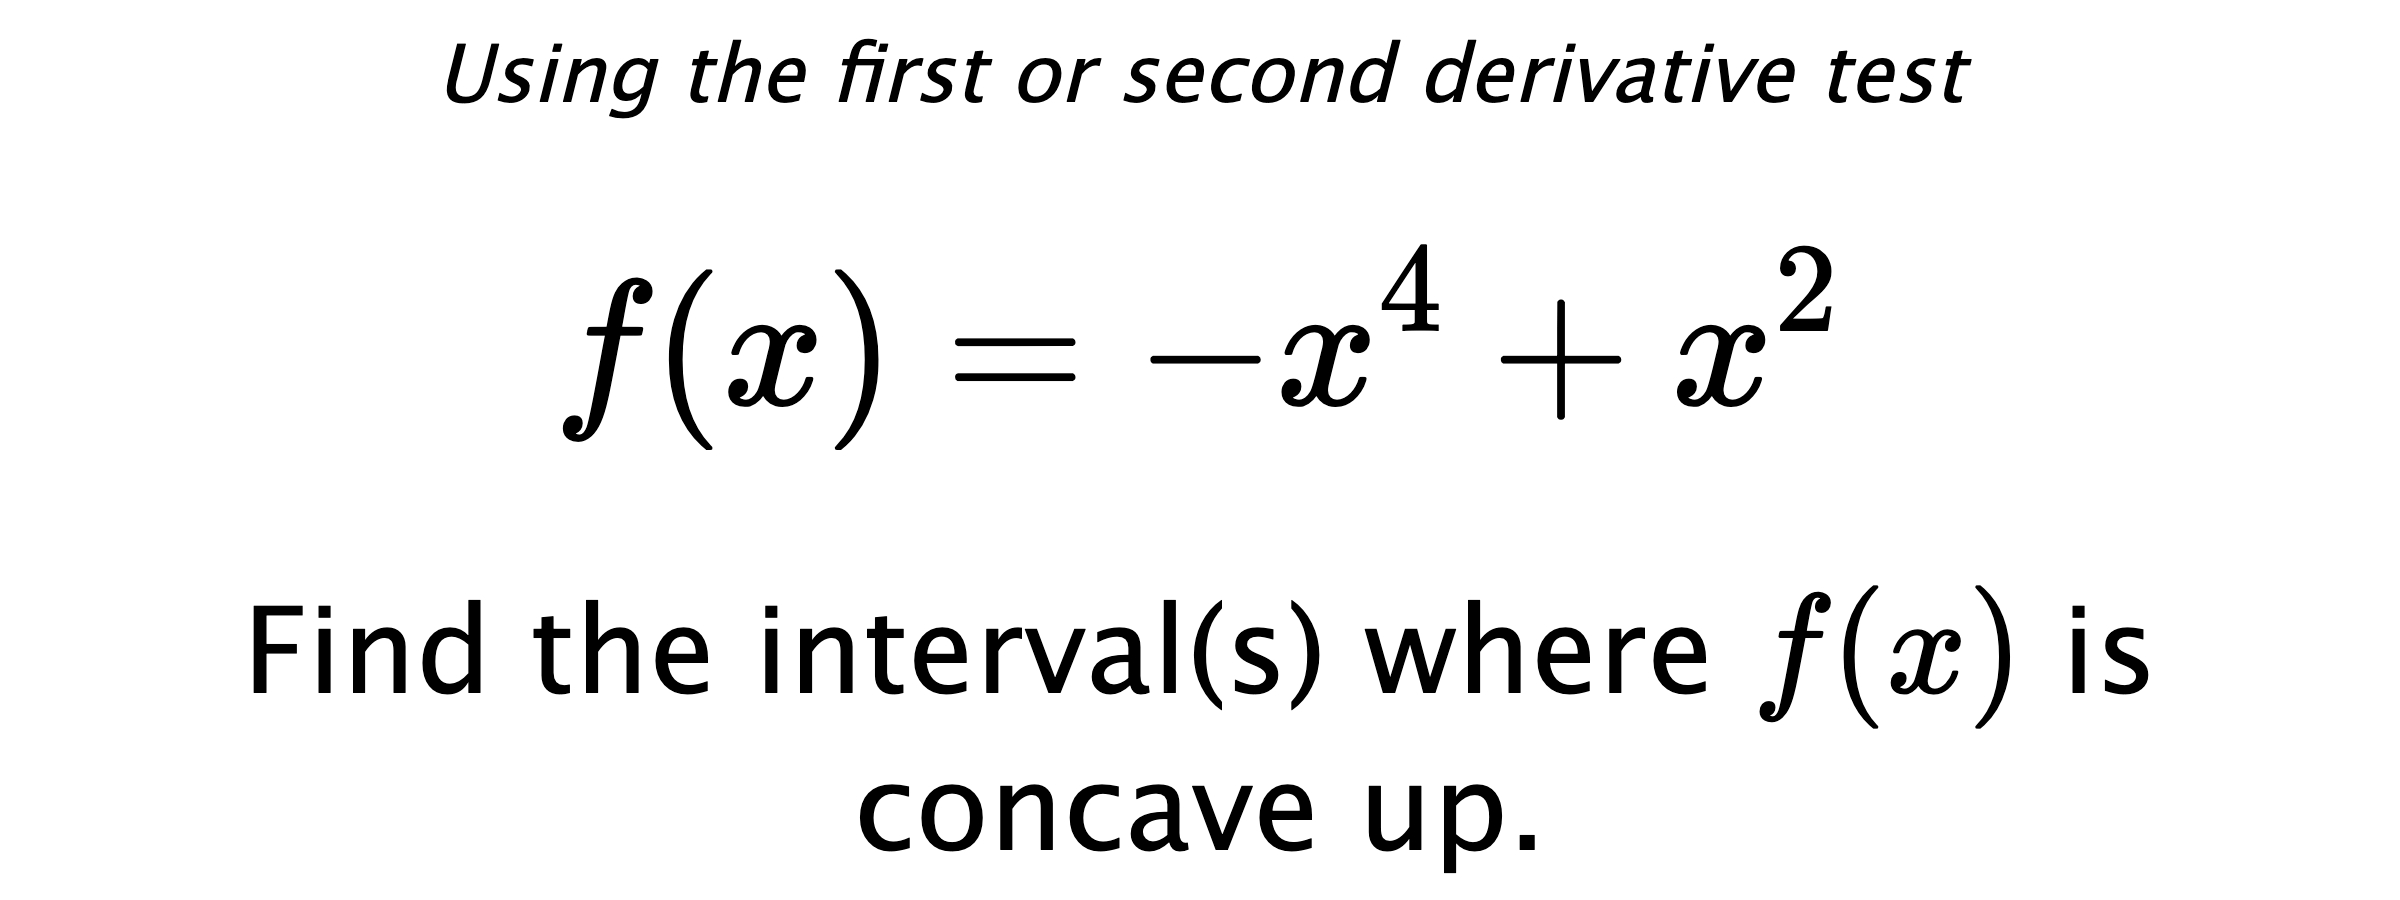 Using the first or second derivative test $$ f(x)=-x^4+x^2 $$ Find the interval(s) where $ f(x) $ is concave up.